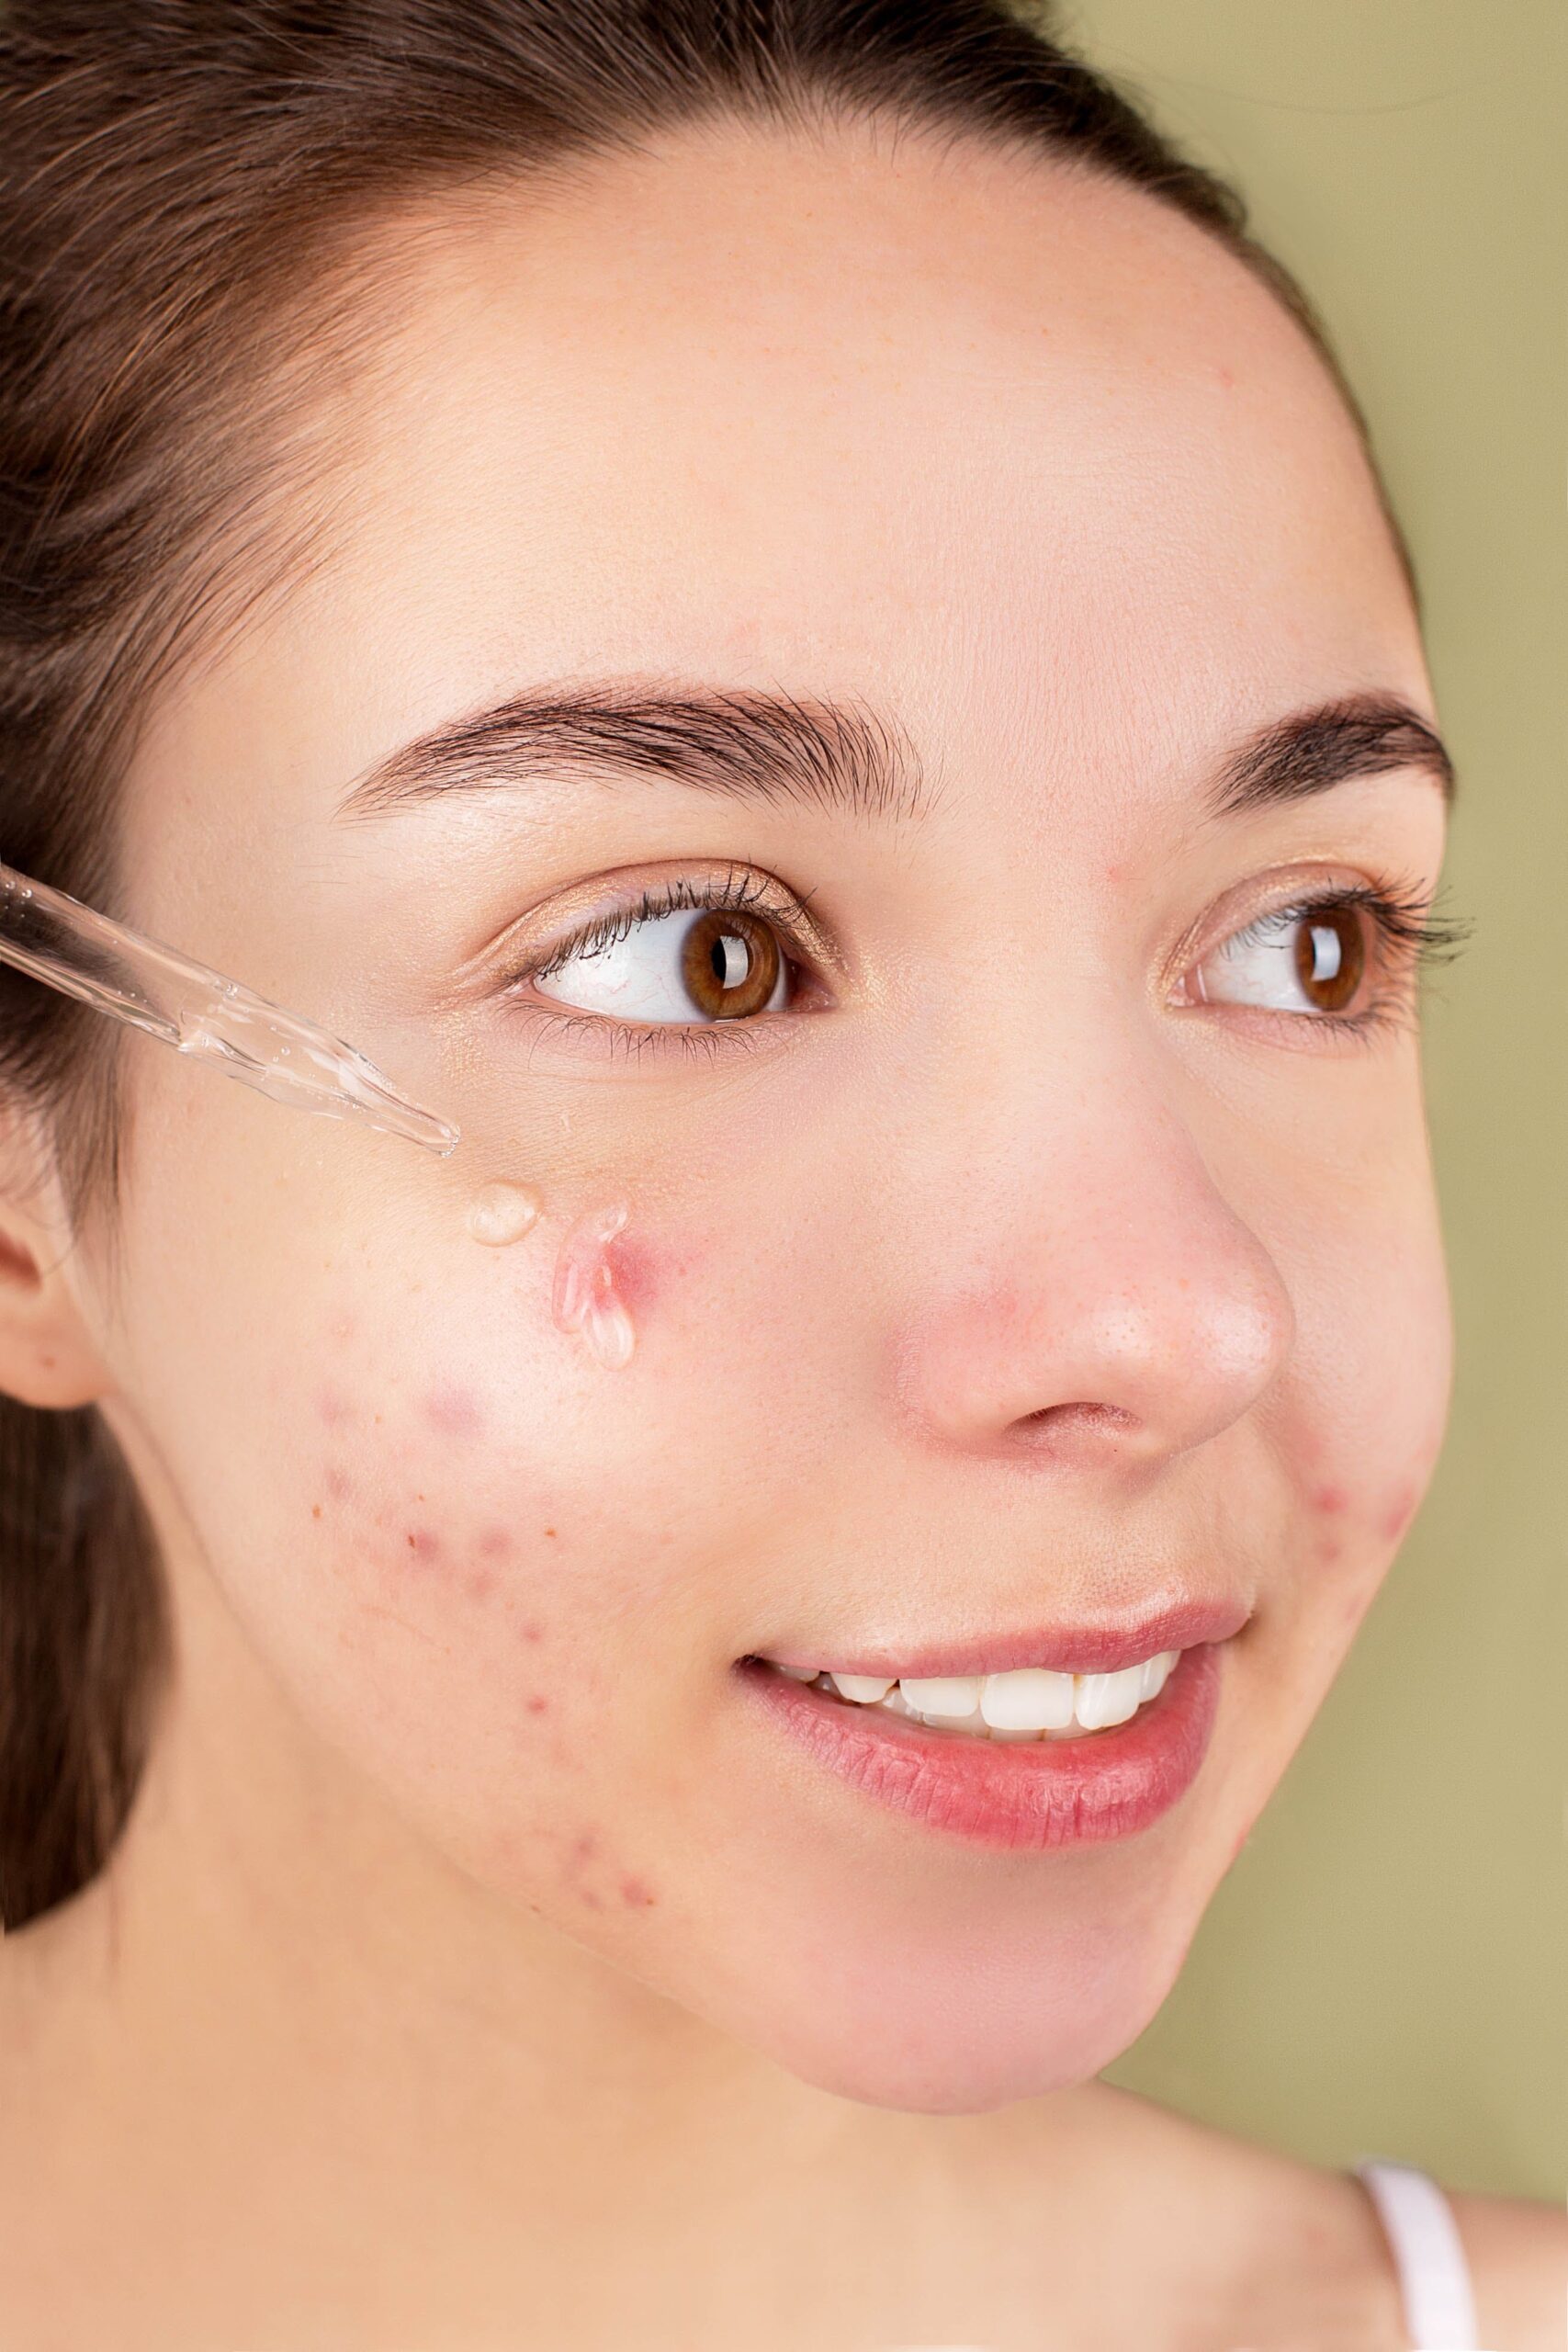 Types & Scar Treatments Preventing Acne Scars